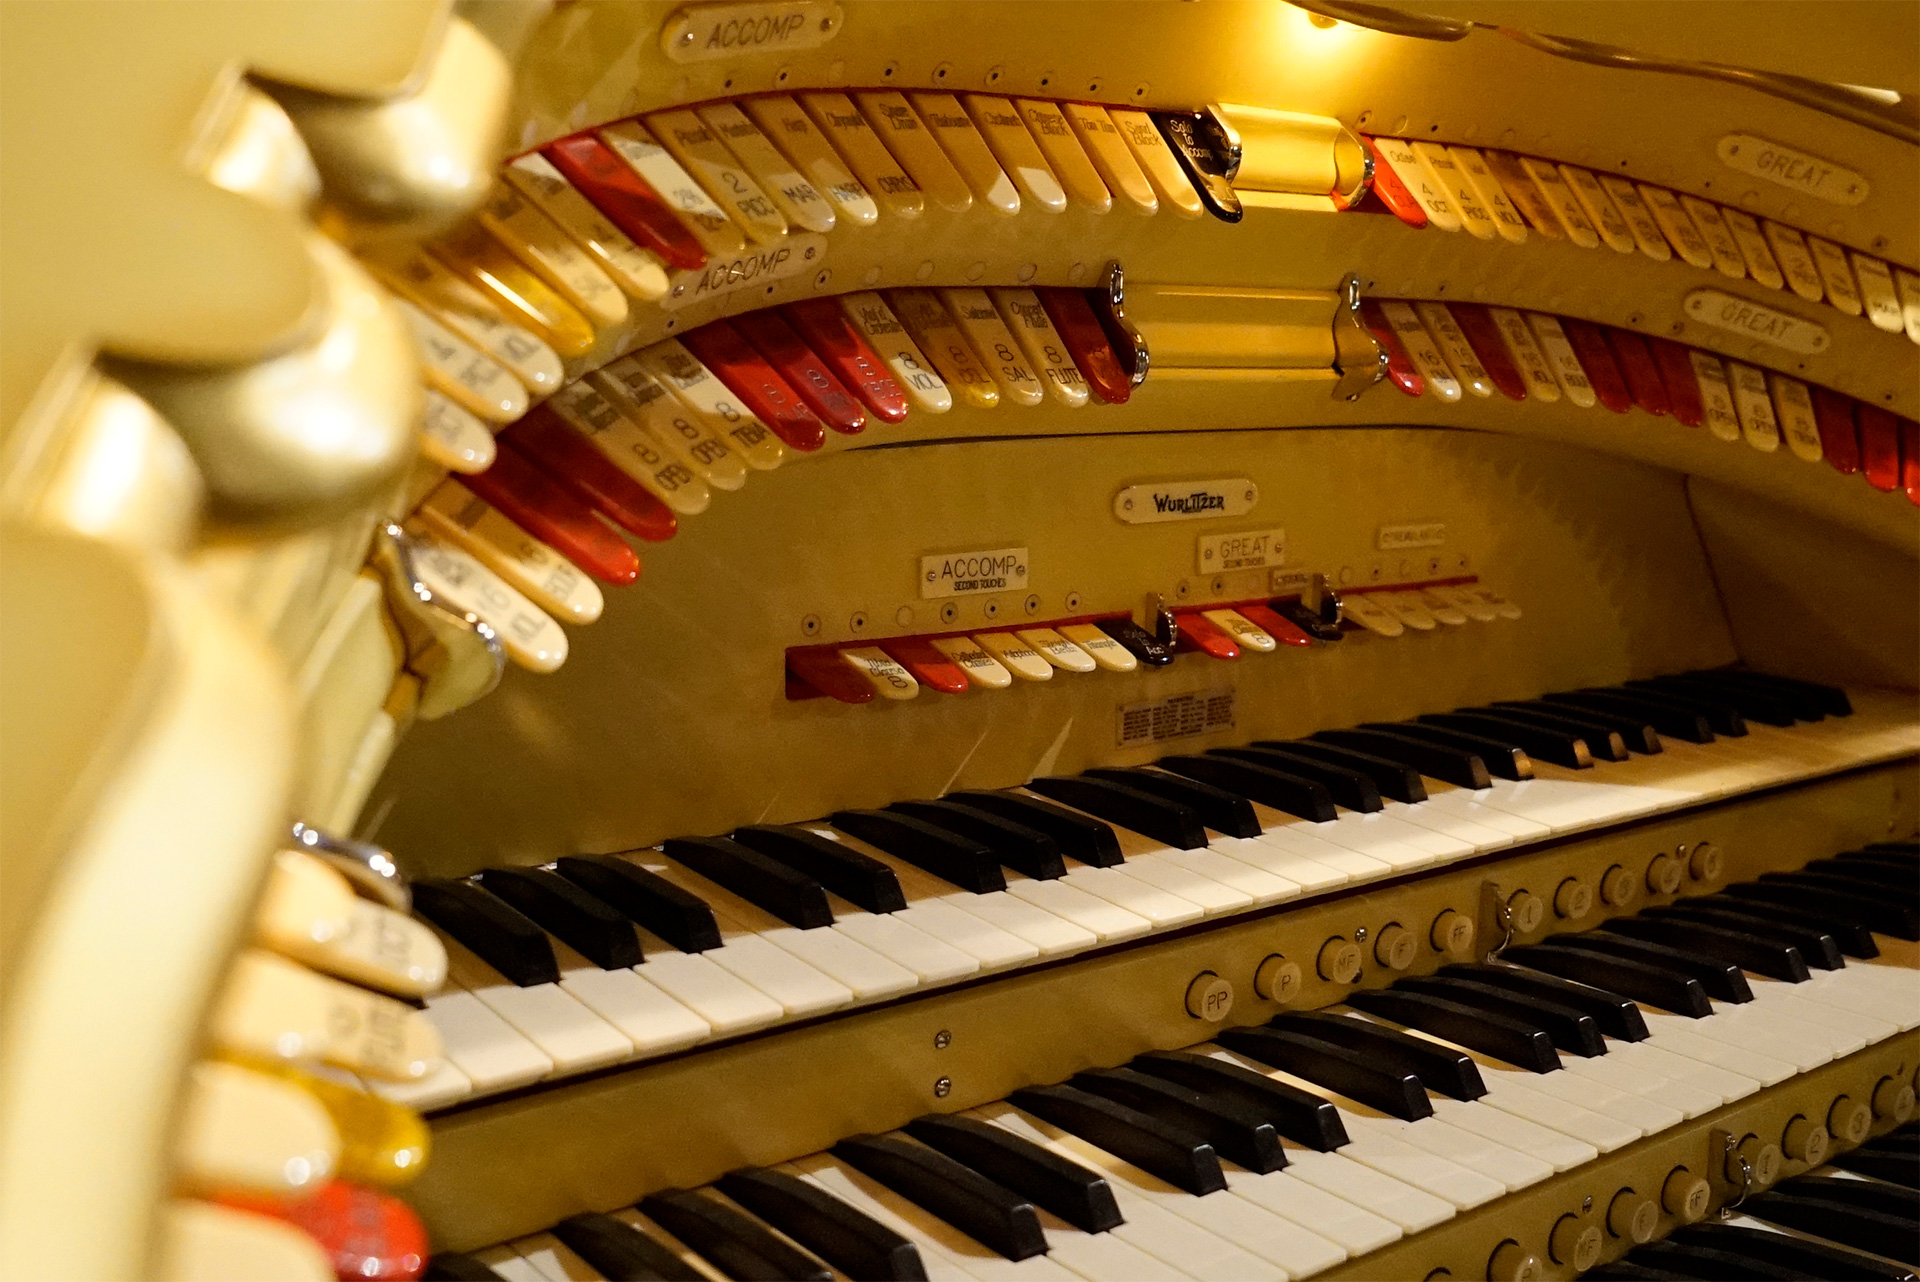 The Mighty Wurlitzer, fully restored between 2017 and 2020